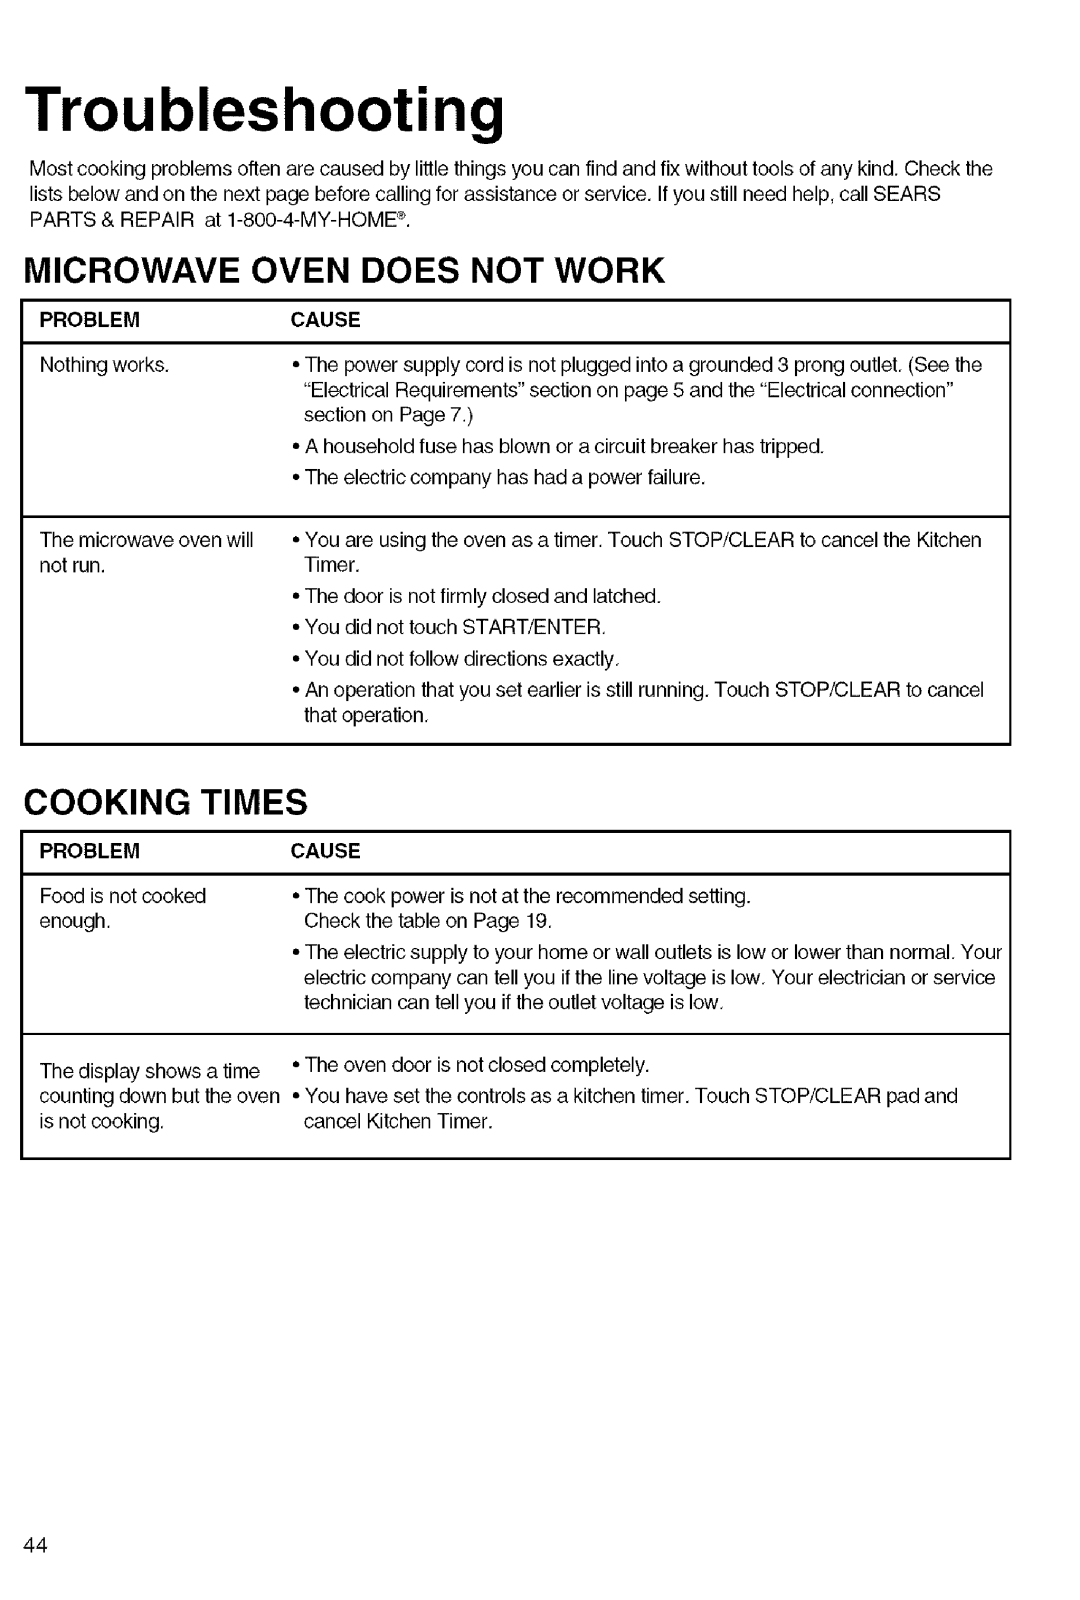 Kenmore 721.80824, 721.80823, 721.80822, 721.80829 manual Troubleshootin, Microwave Oven Does Not Work, Cooking Times, Problem 